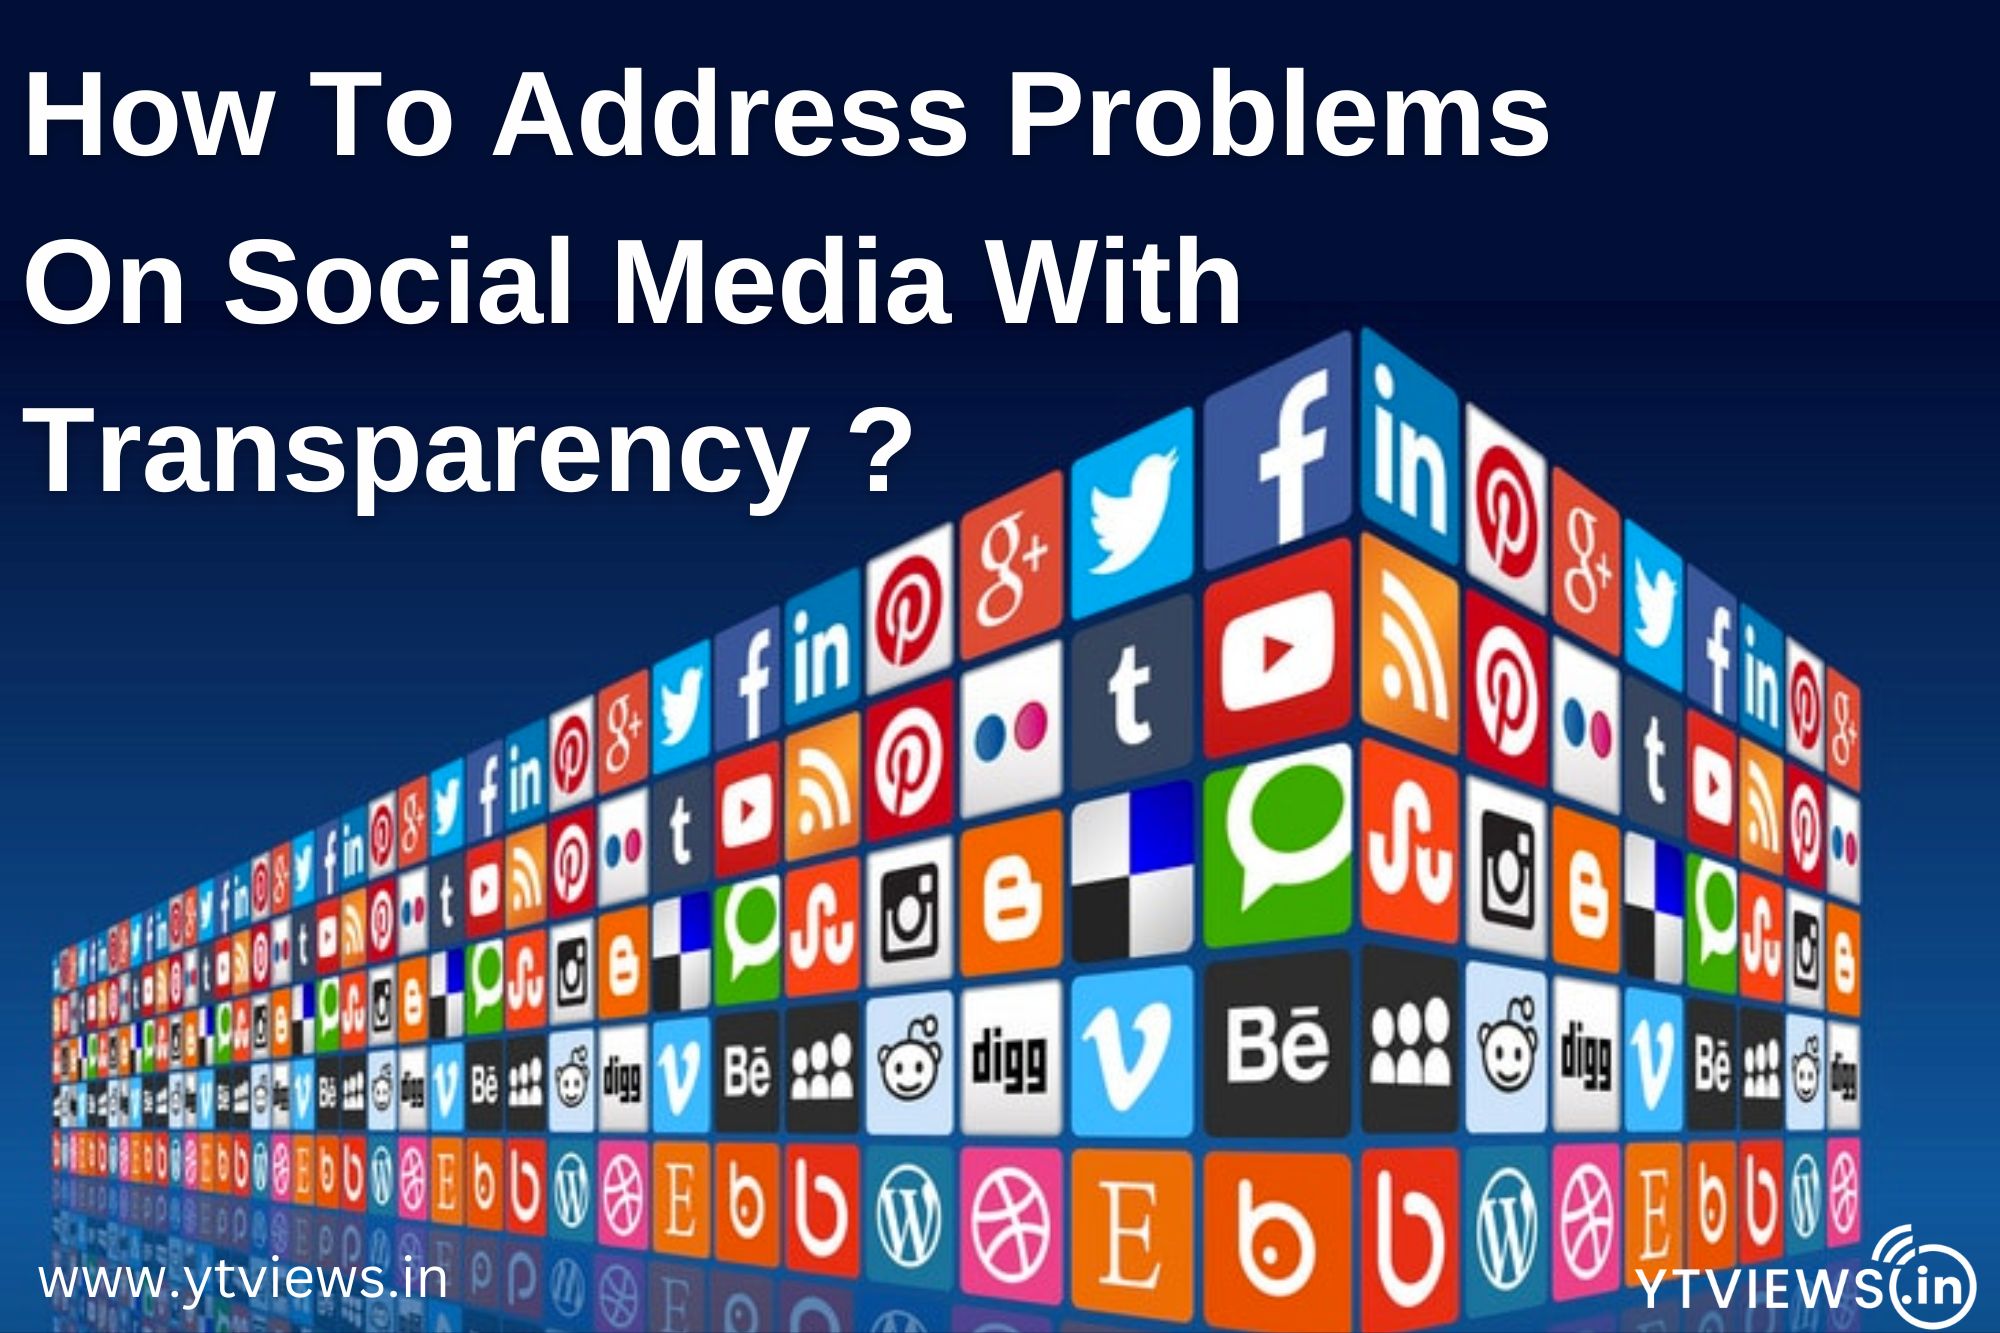 How to address problems on social media with transparency